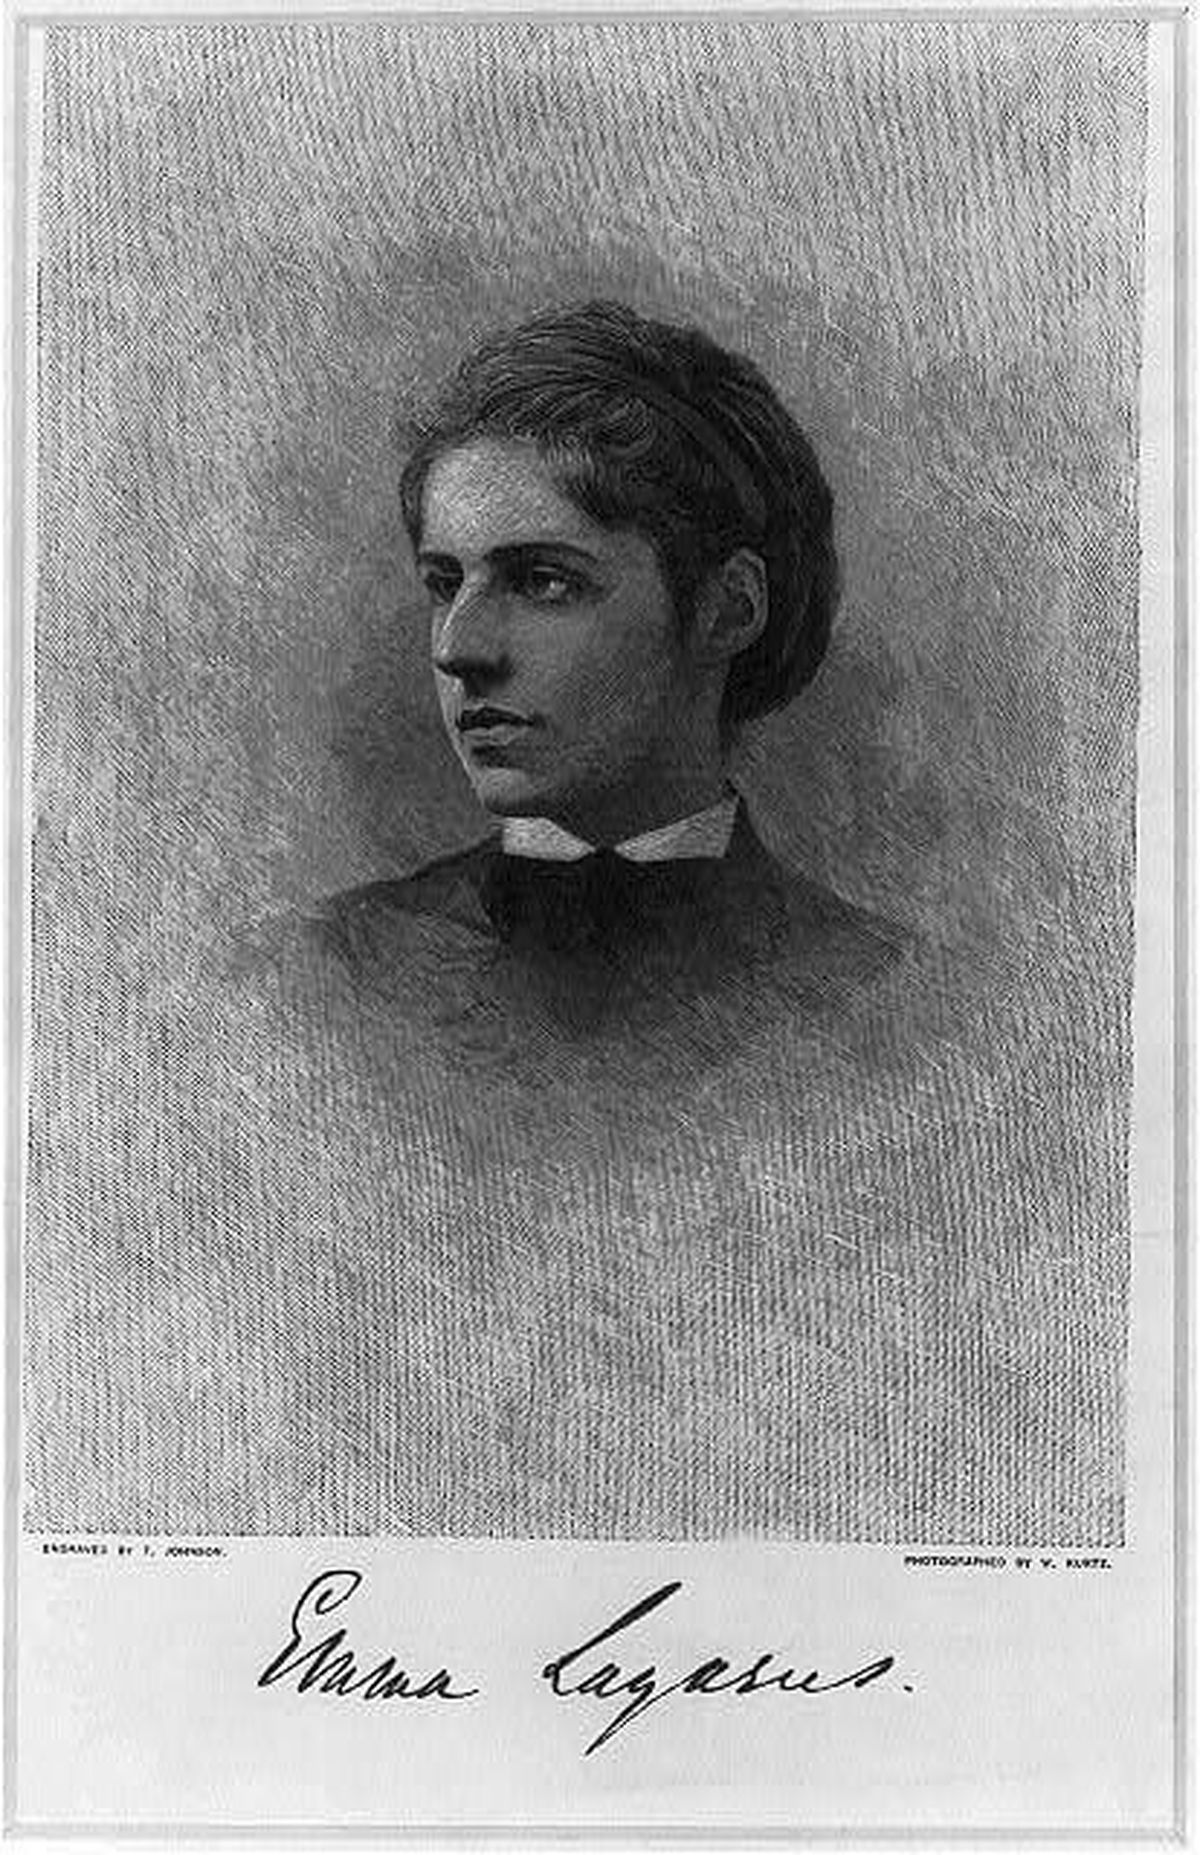 Emma Lazarus / engraved by T. Johnson ; photographed by W. Kurtz.  (LIBRARY OF CONGRESS)